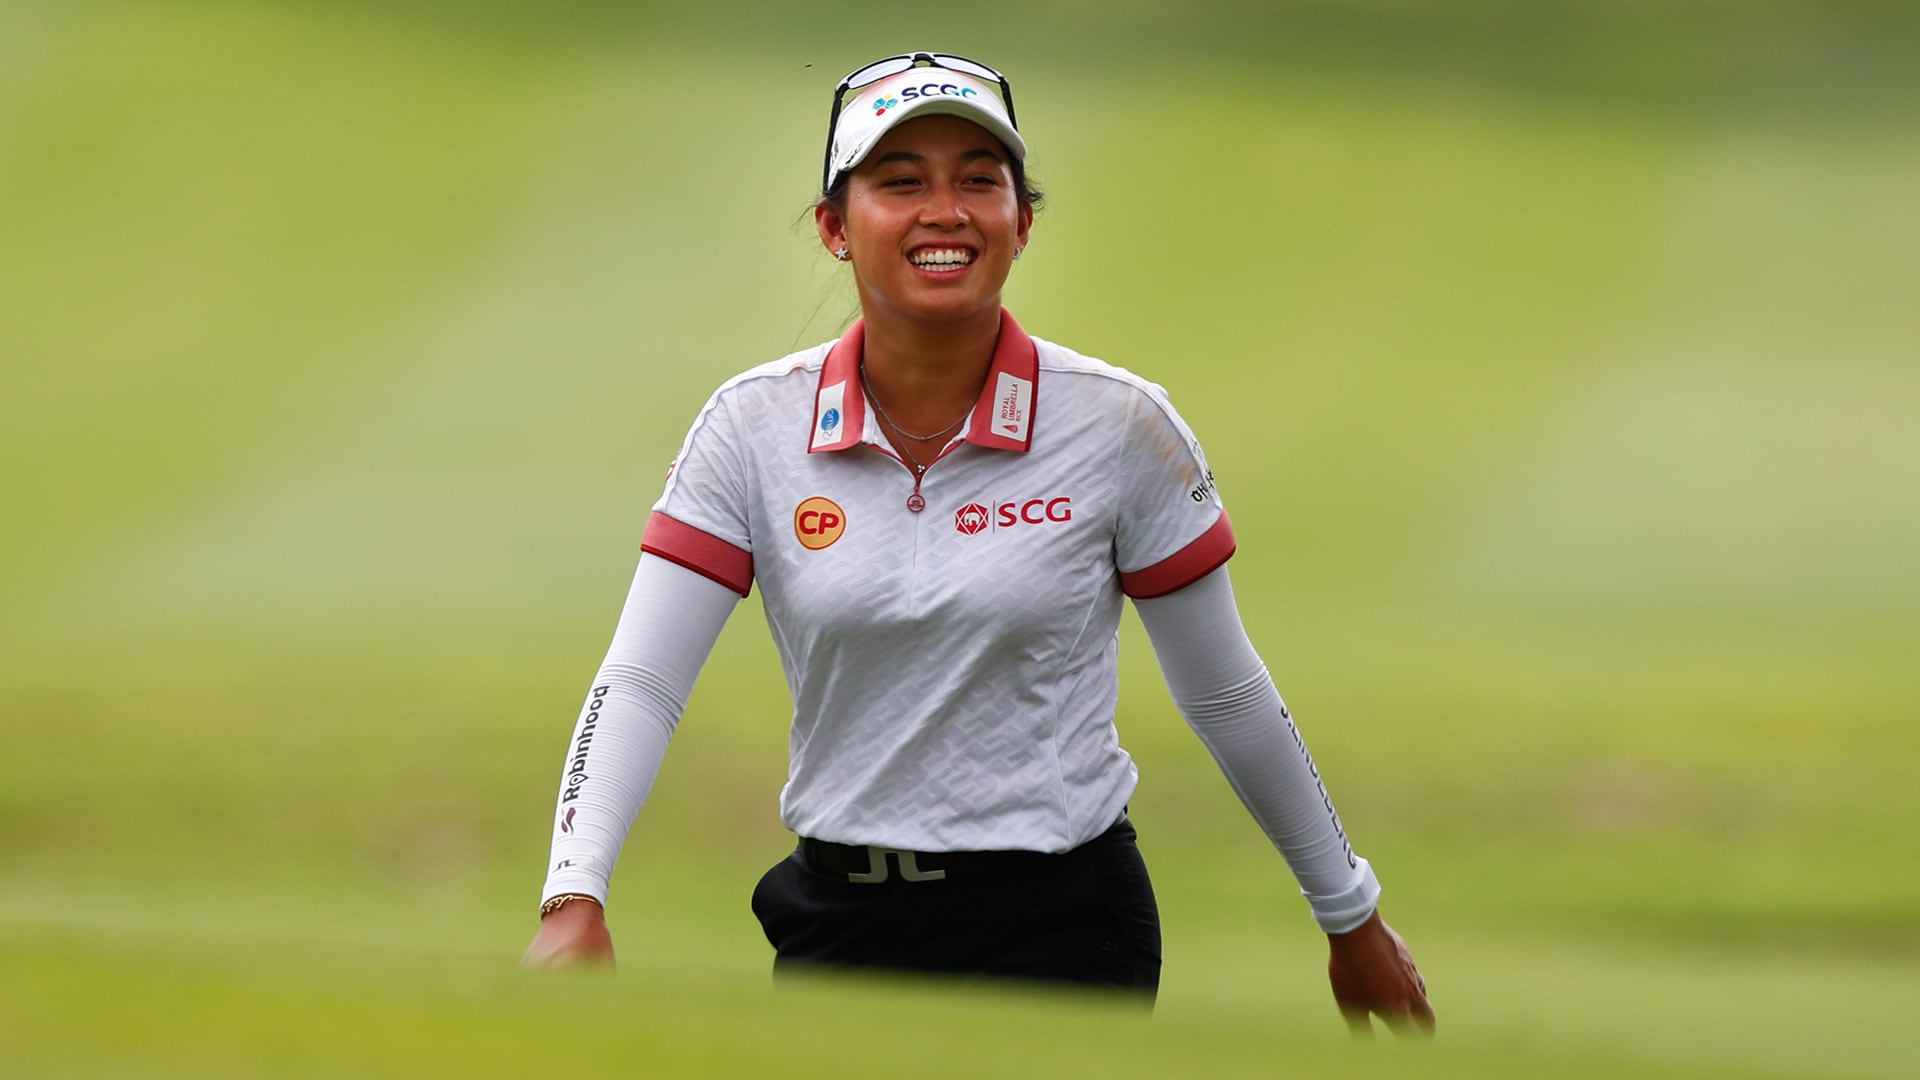 Atthaya Thitikul wins 2022 LPGA Rookie of the Year, second consecutive Thai to win